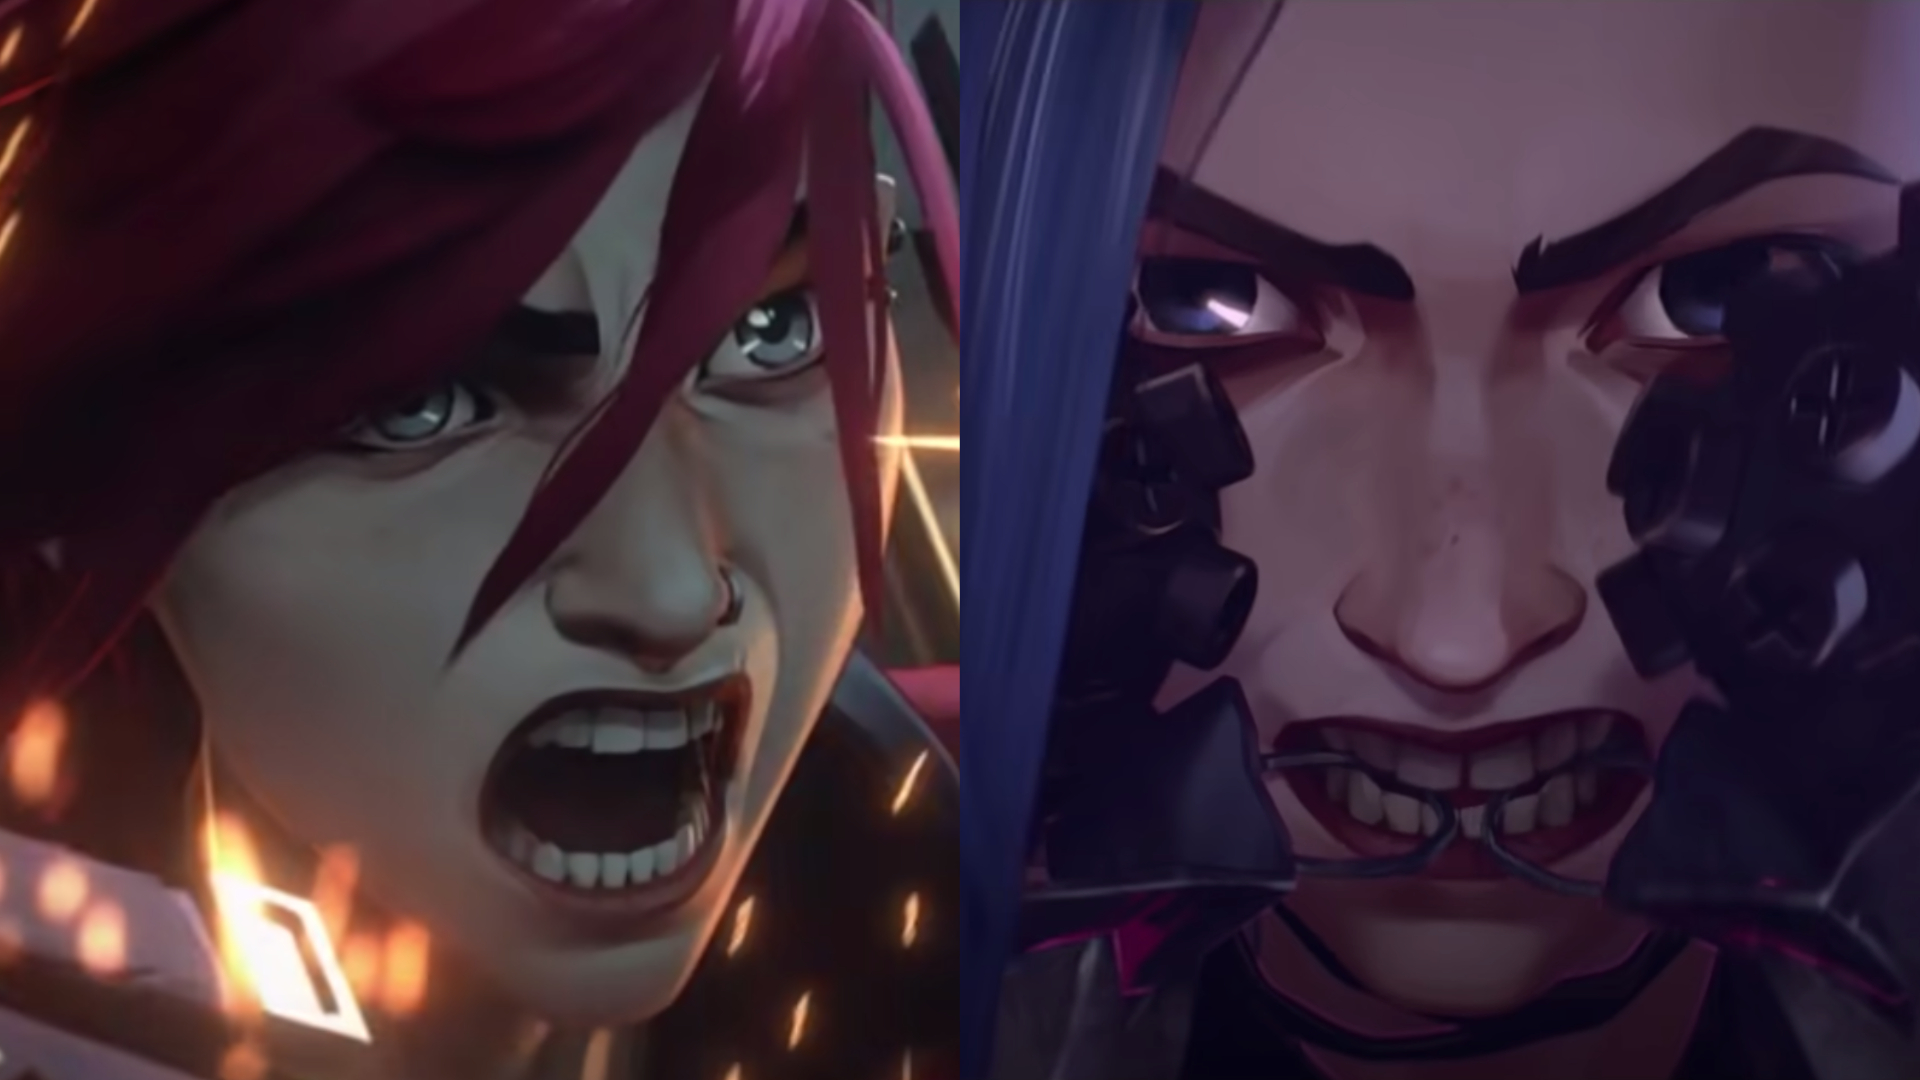 Discover Jinx and Vi's backstory in Netflix's League of Legends anime